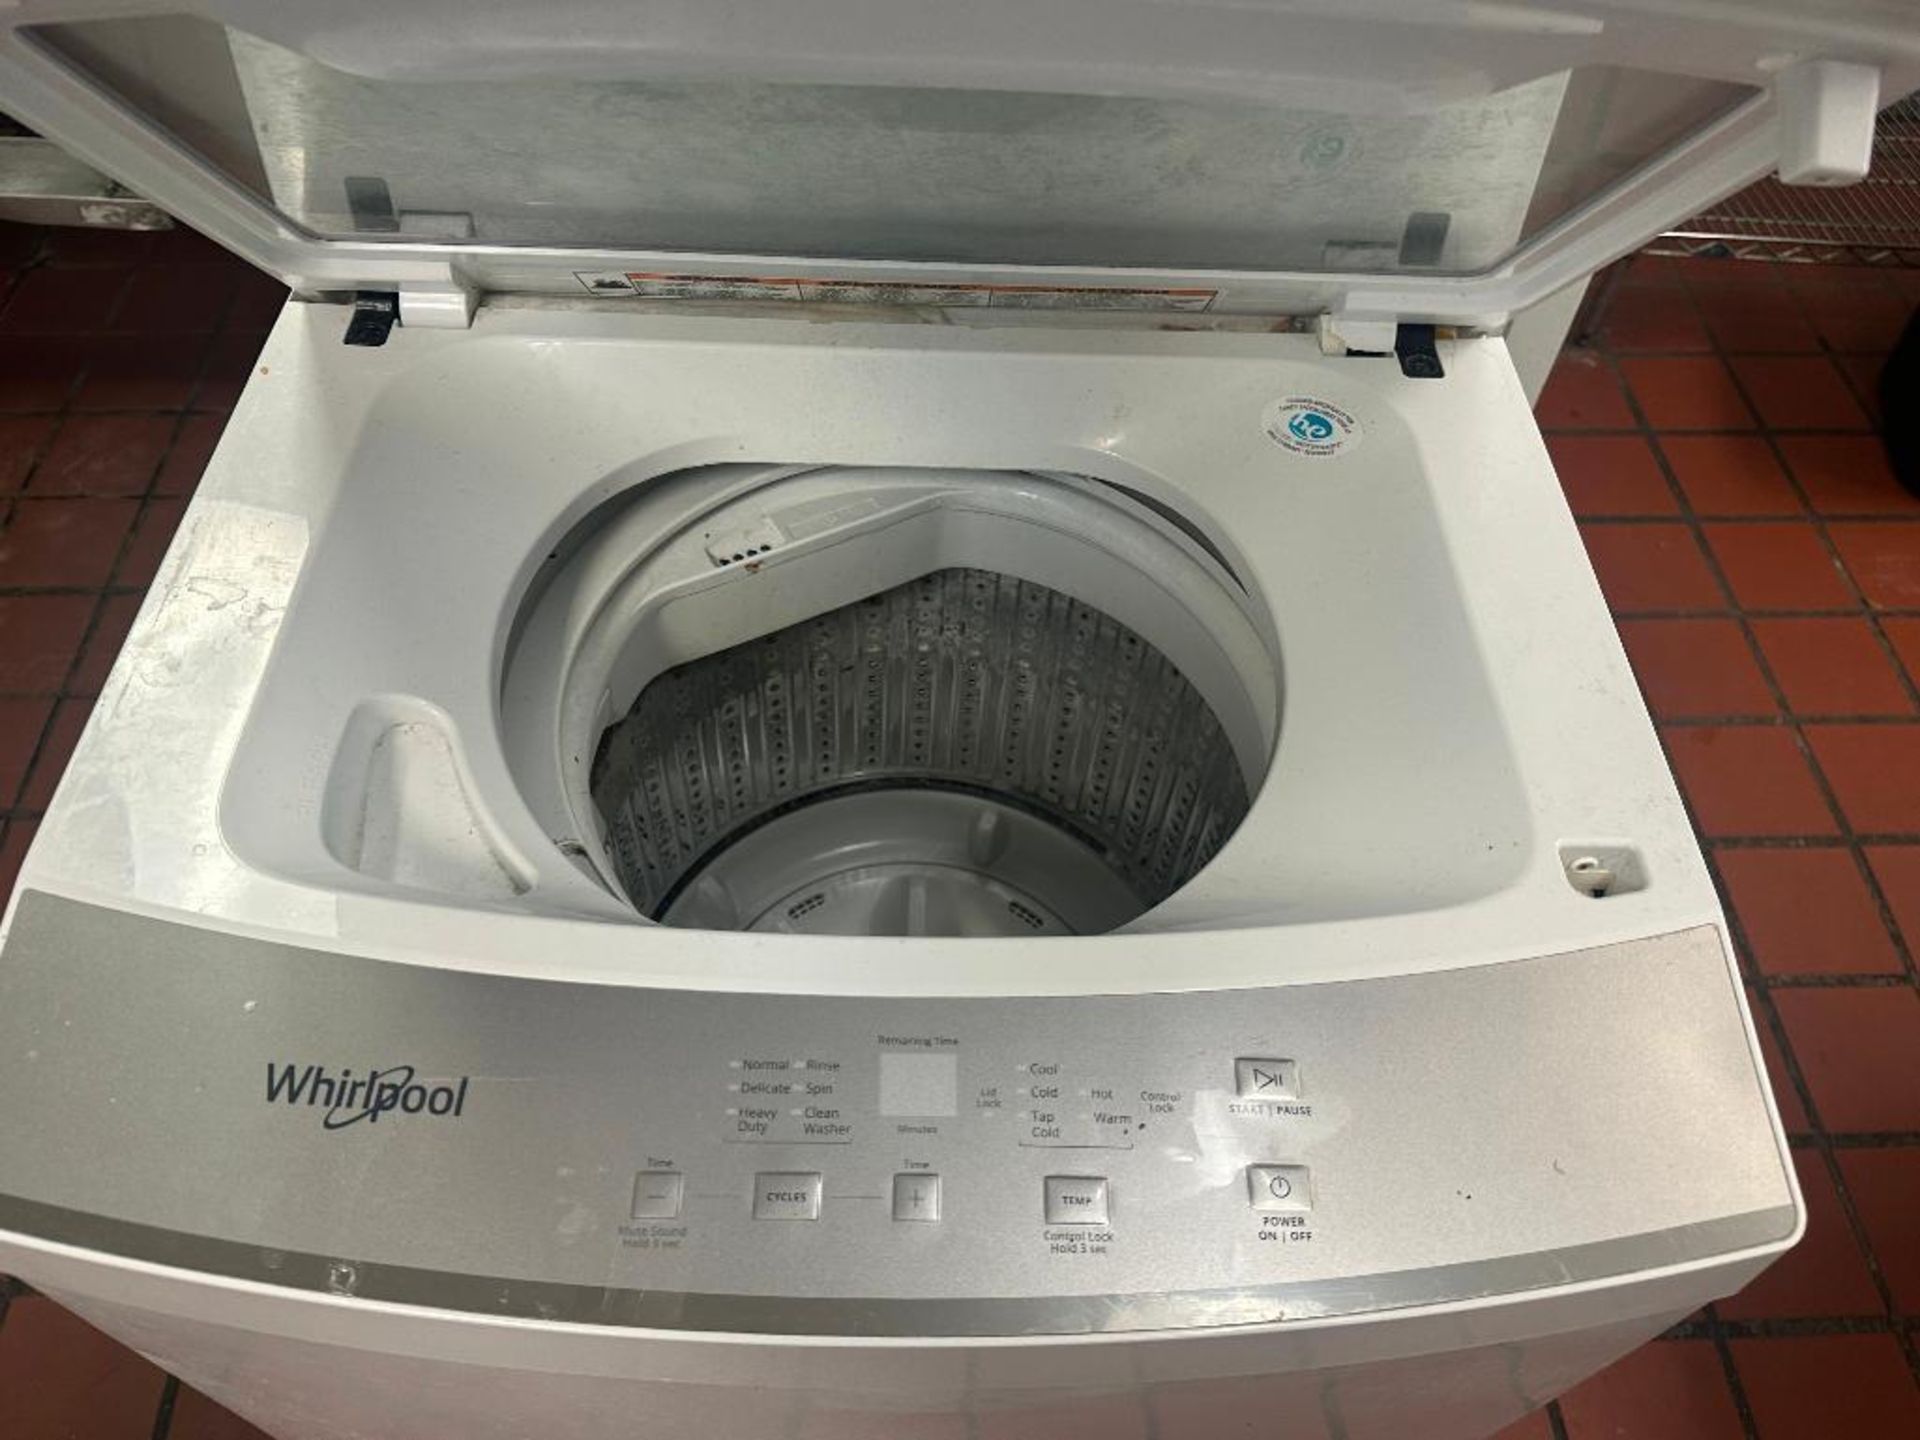 DESCRIPTION WHIRLPOOL WASHER AND DRYER ALL IN ONE BRAND / MODEL: WHIRLPOOL LOCATION 7399 O'Connor Dr - Bild 4 aus 4